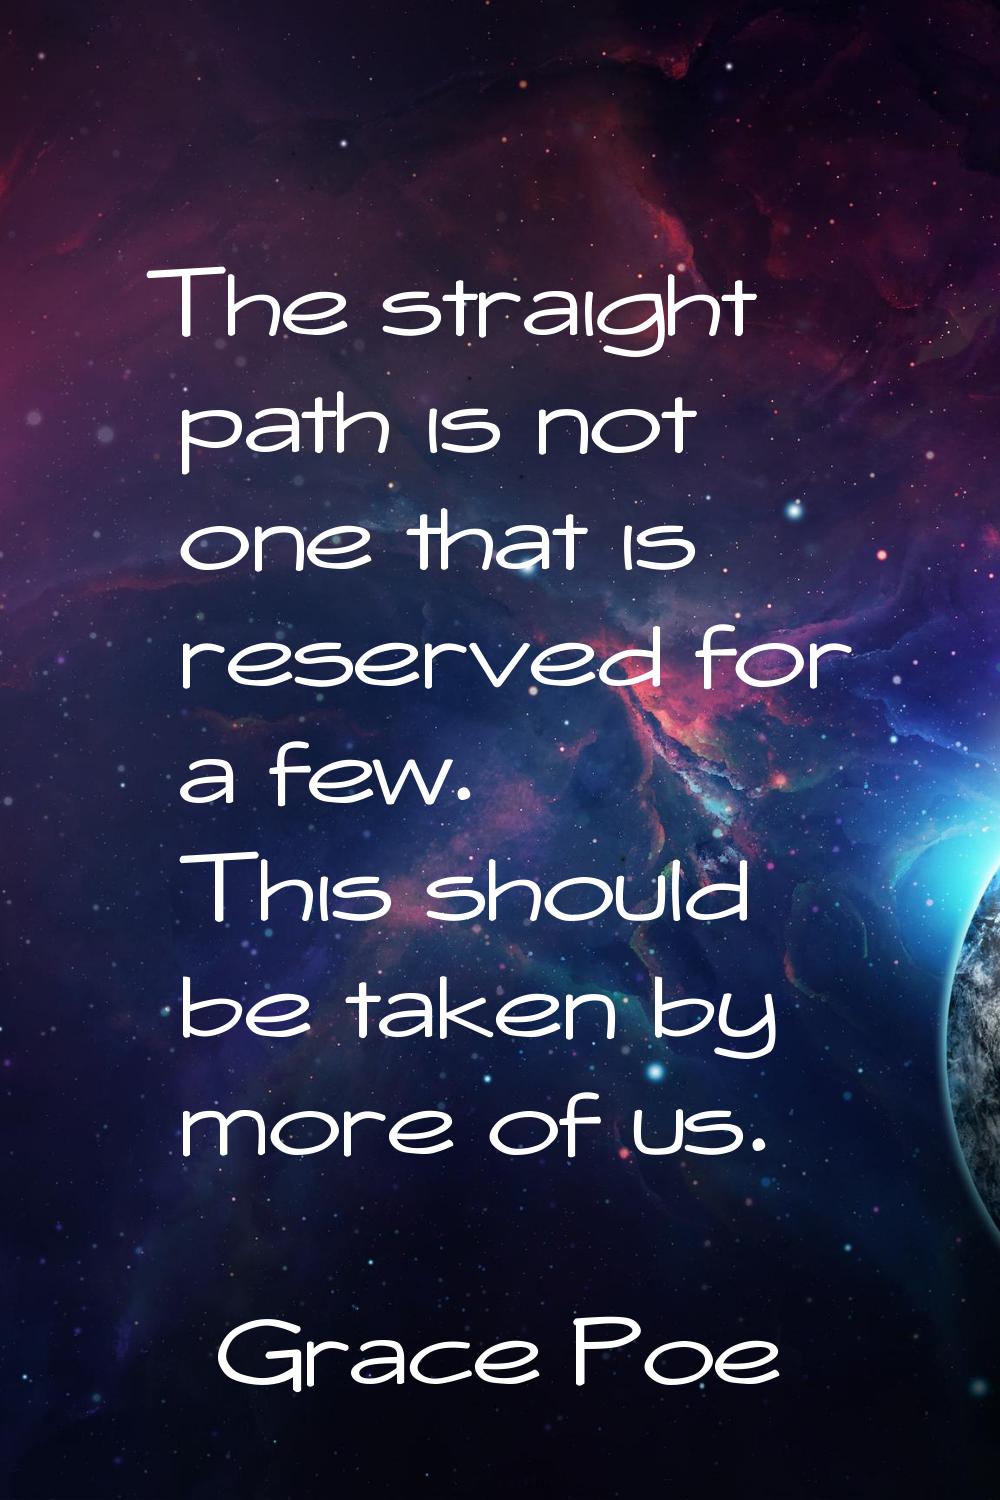 The straight path is not one that is reserved for a few. This should be taken by more of us.